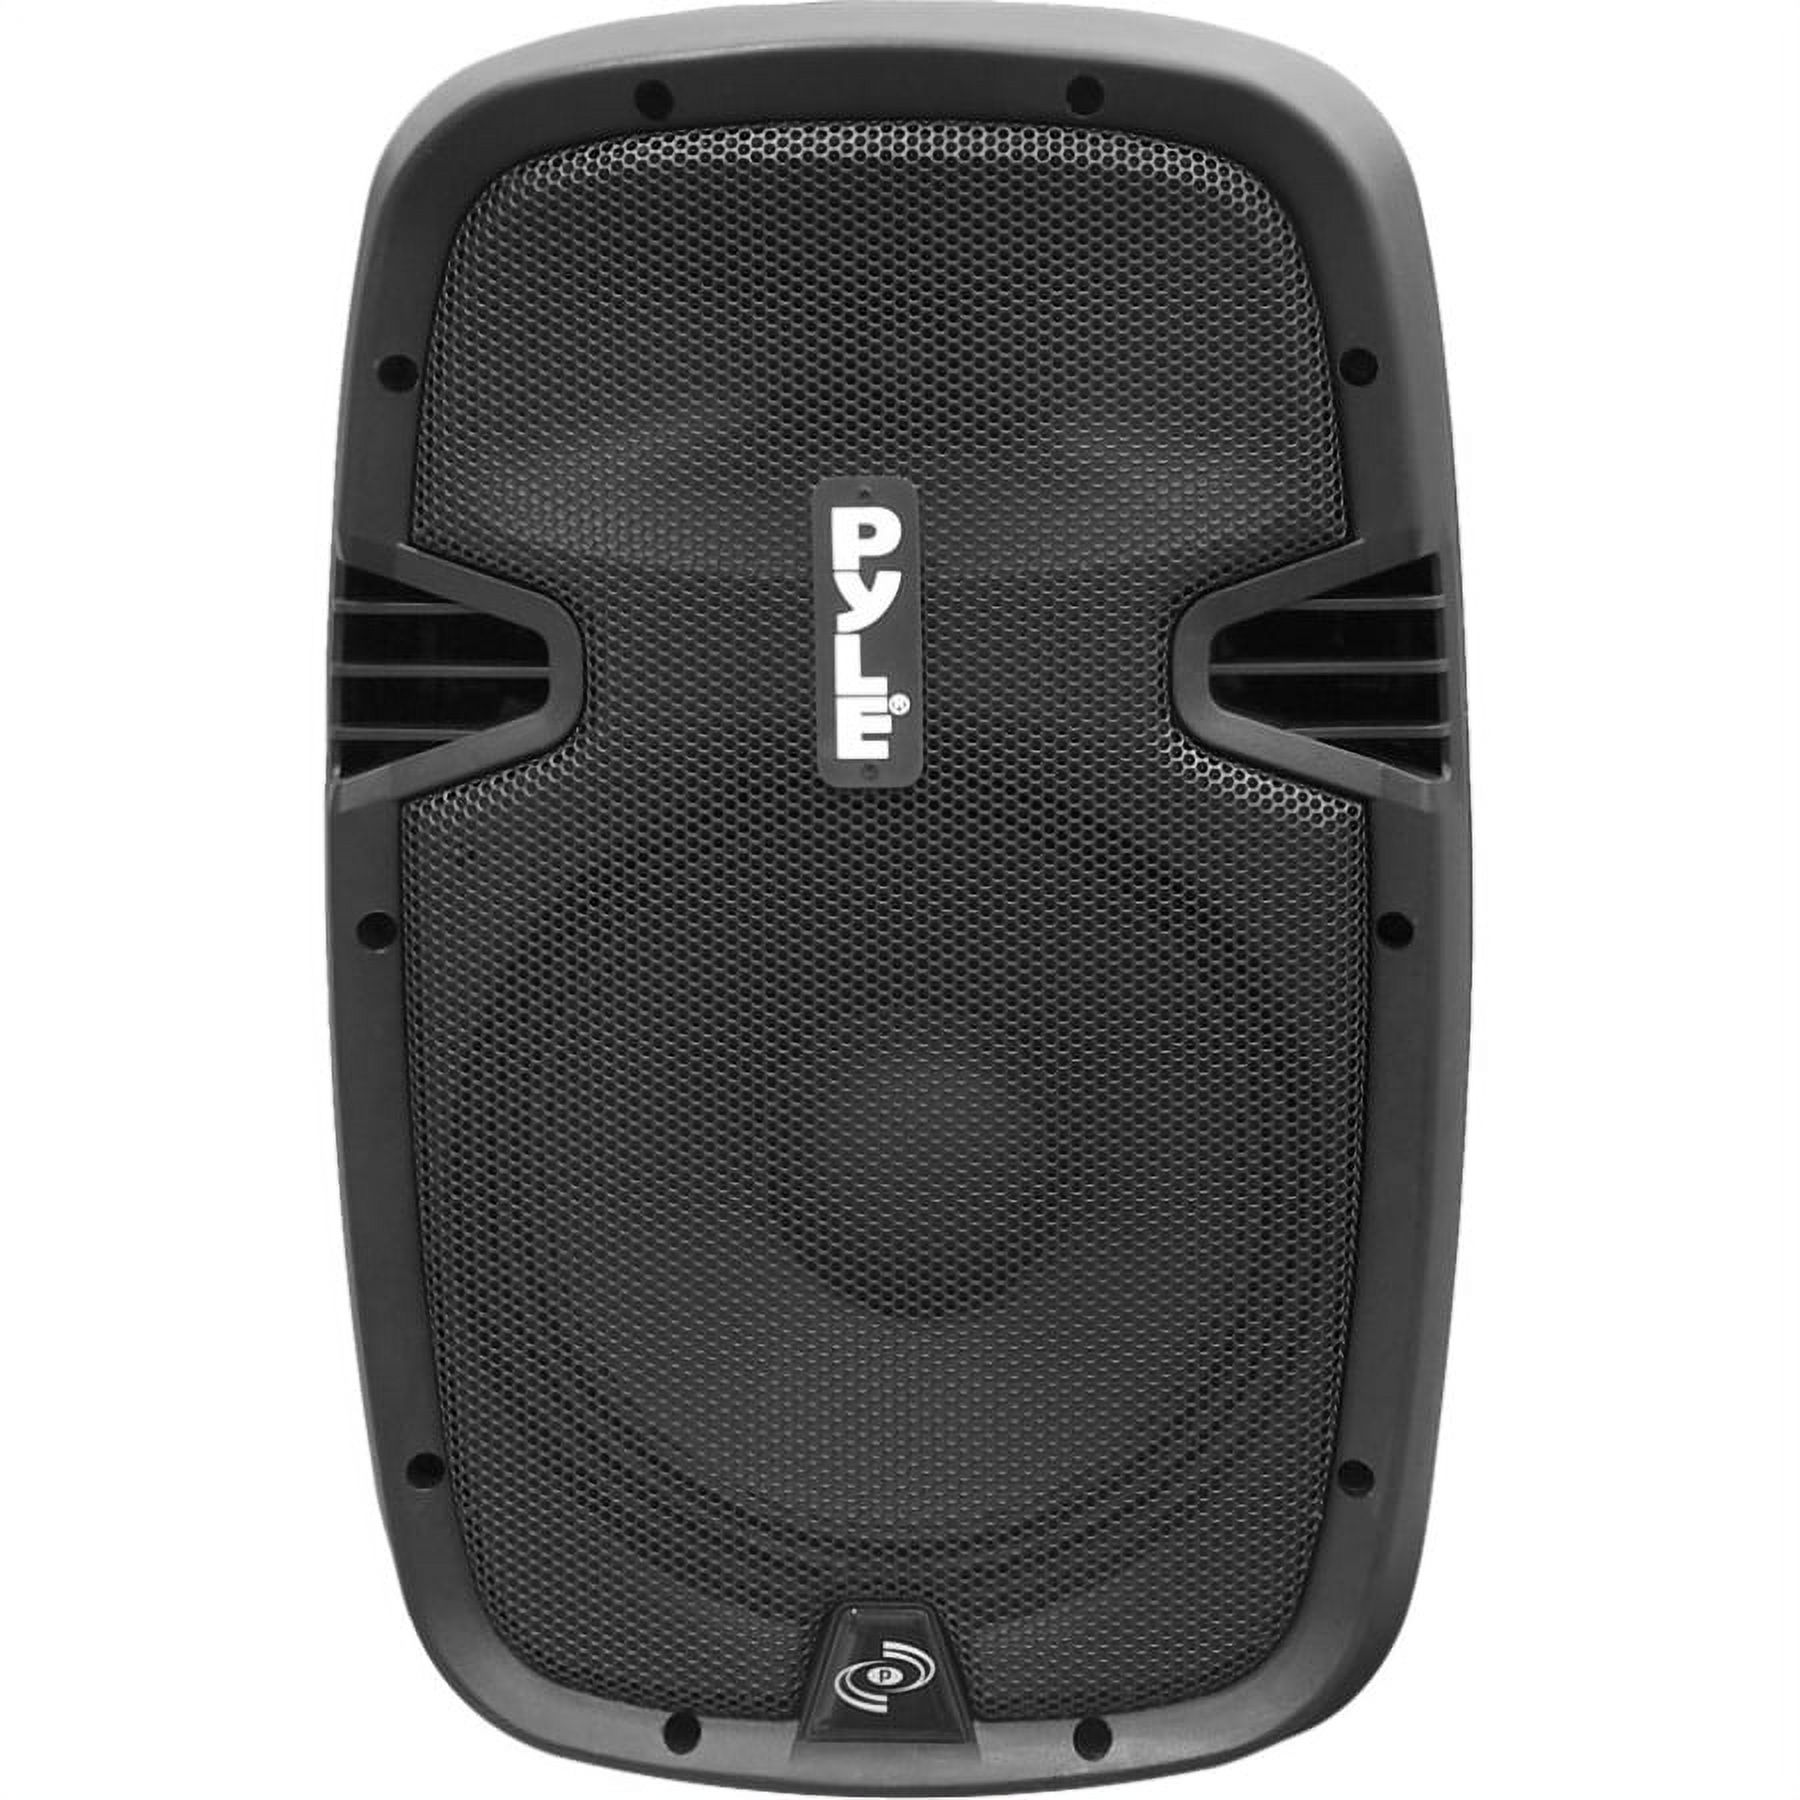 Pyle Pro PPHP1537UB 600W RMS Portable Bluetooth® Speaker System - image 1 of 7